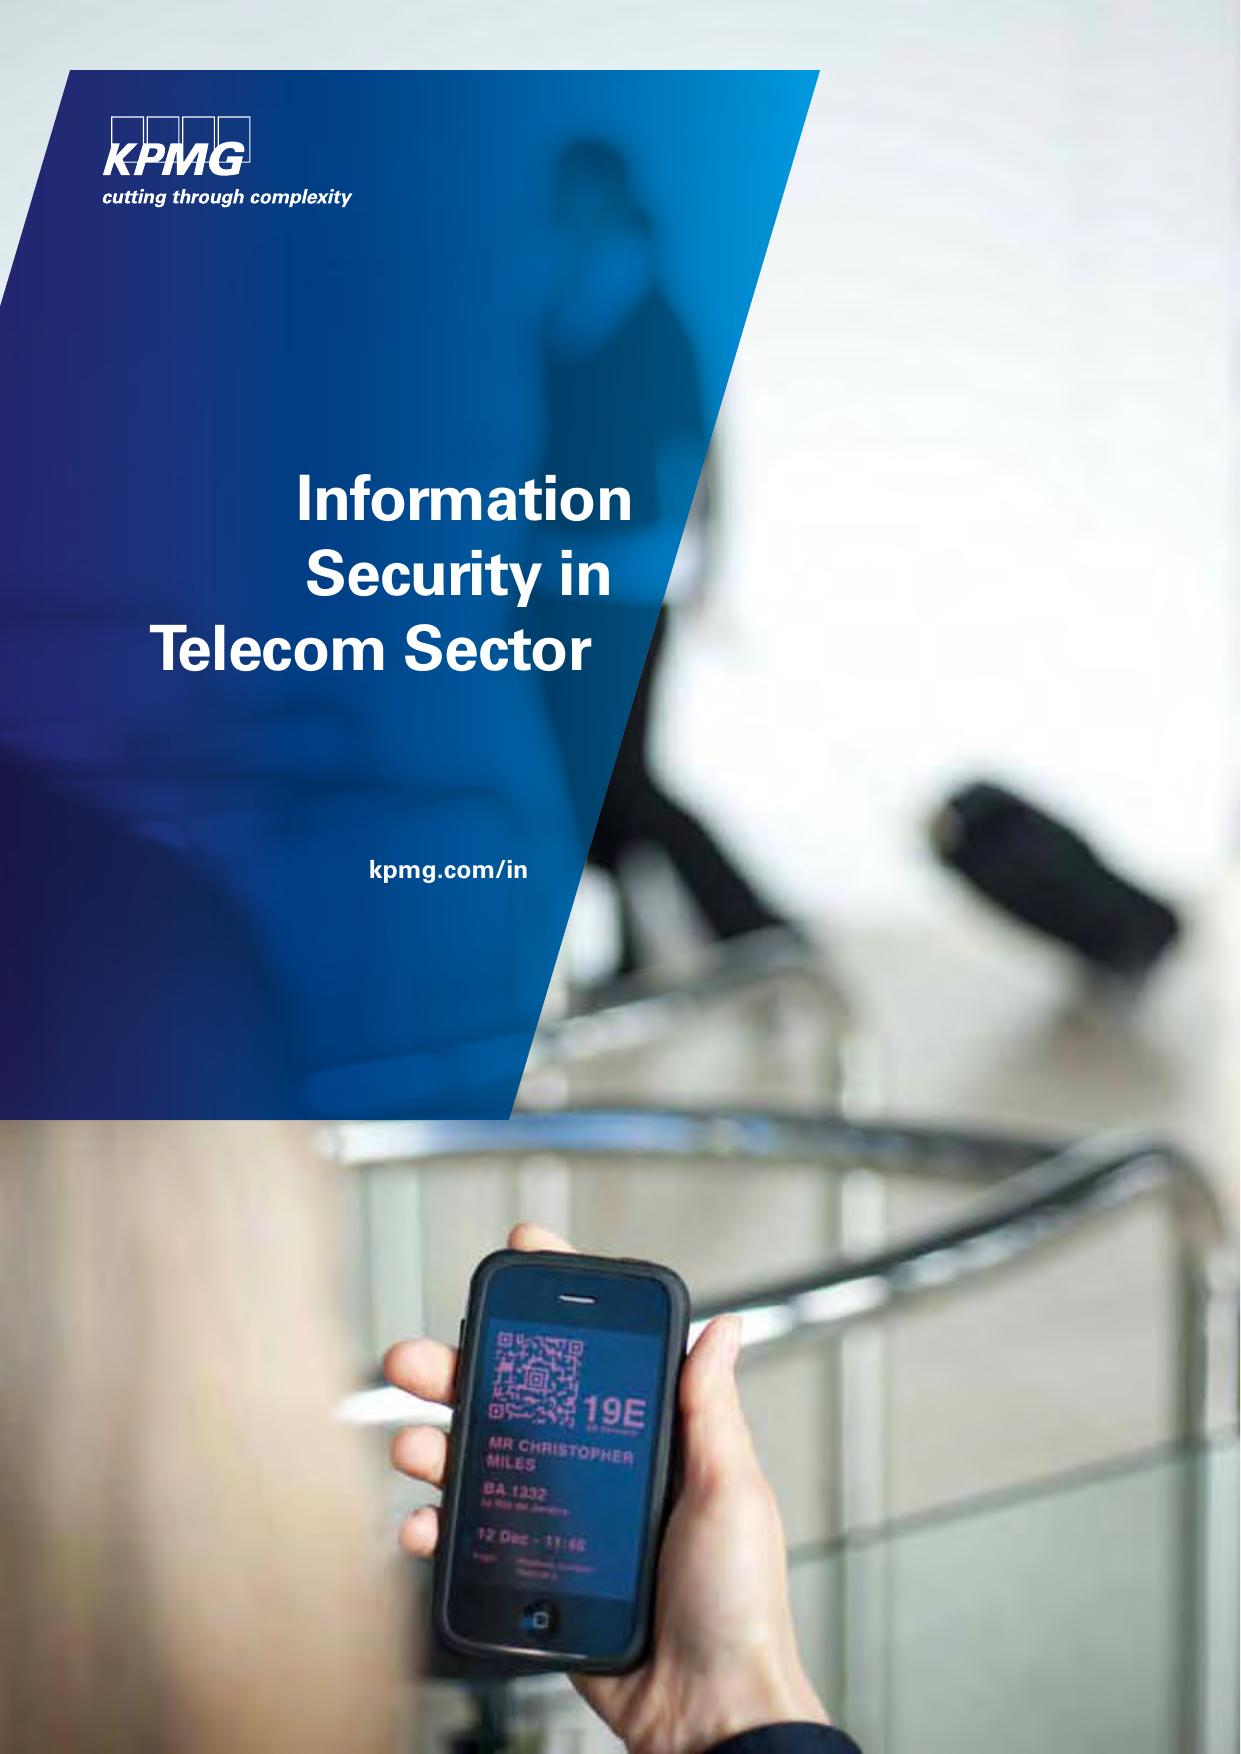 Information Security in Telecom Sector